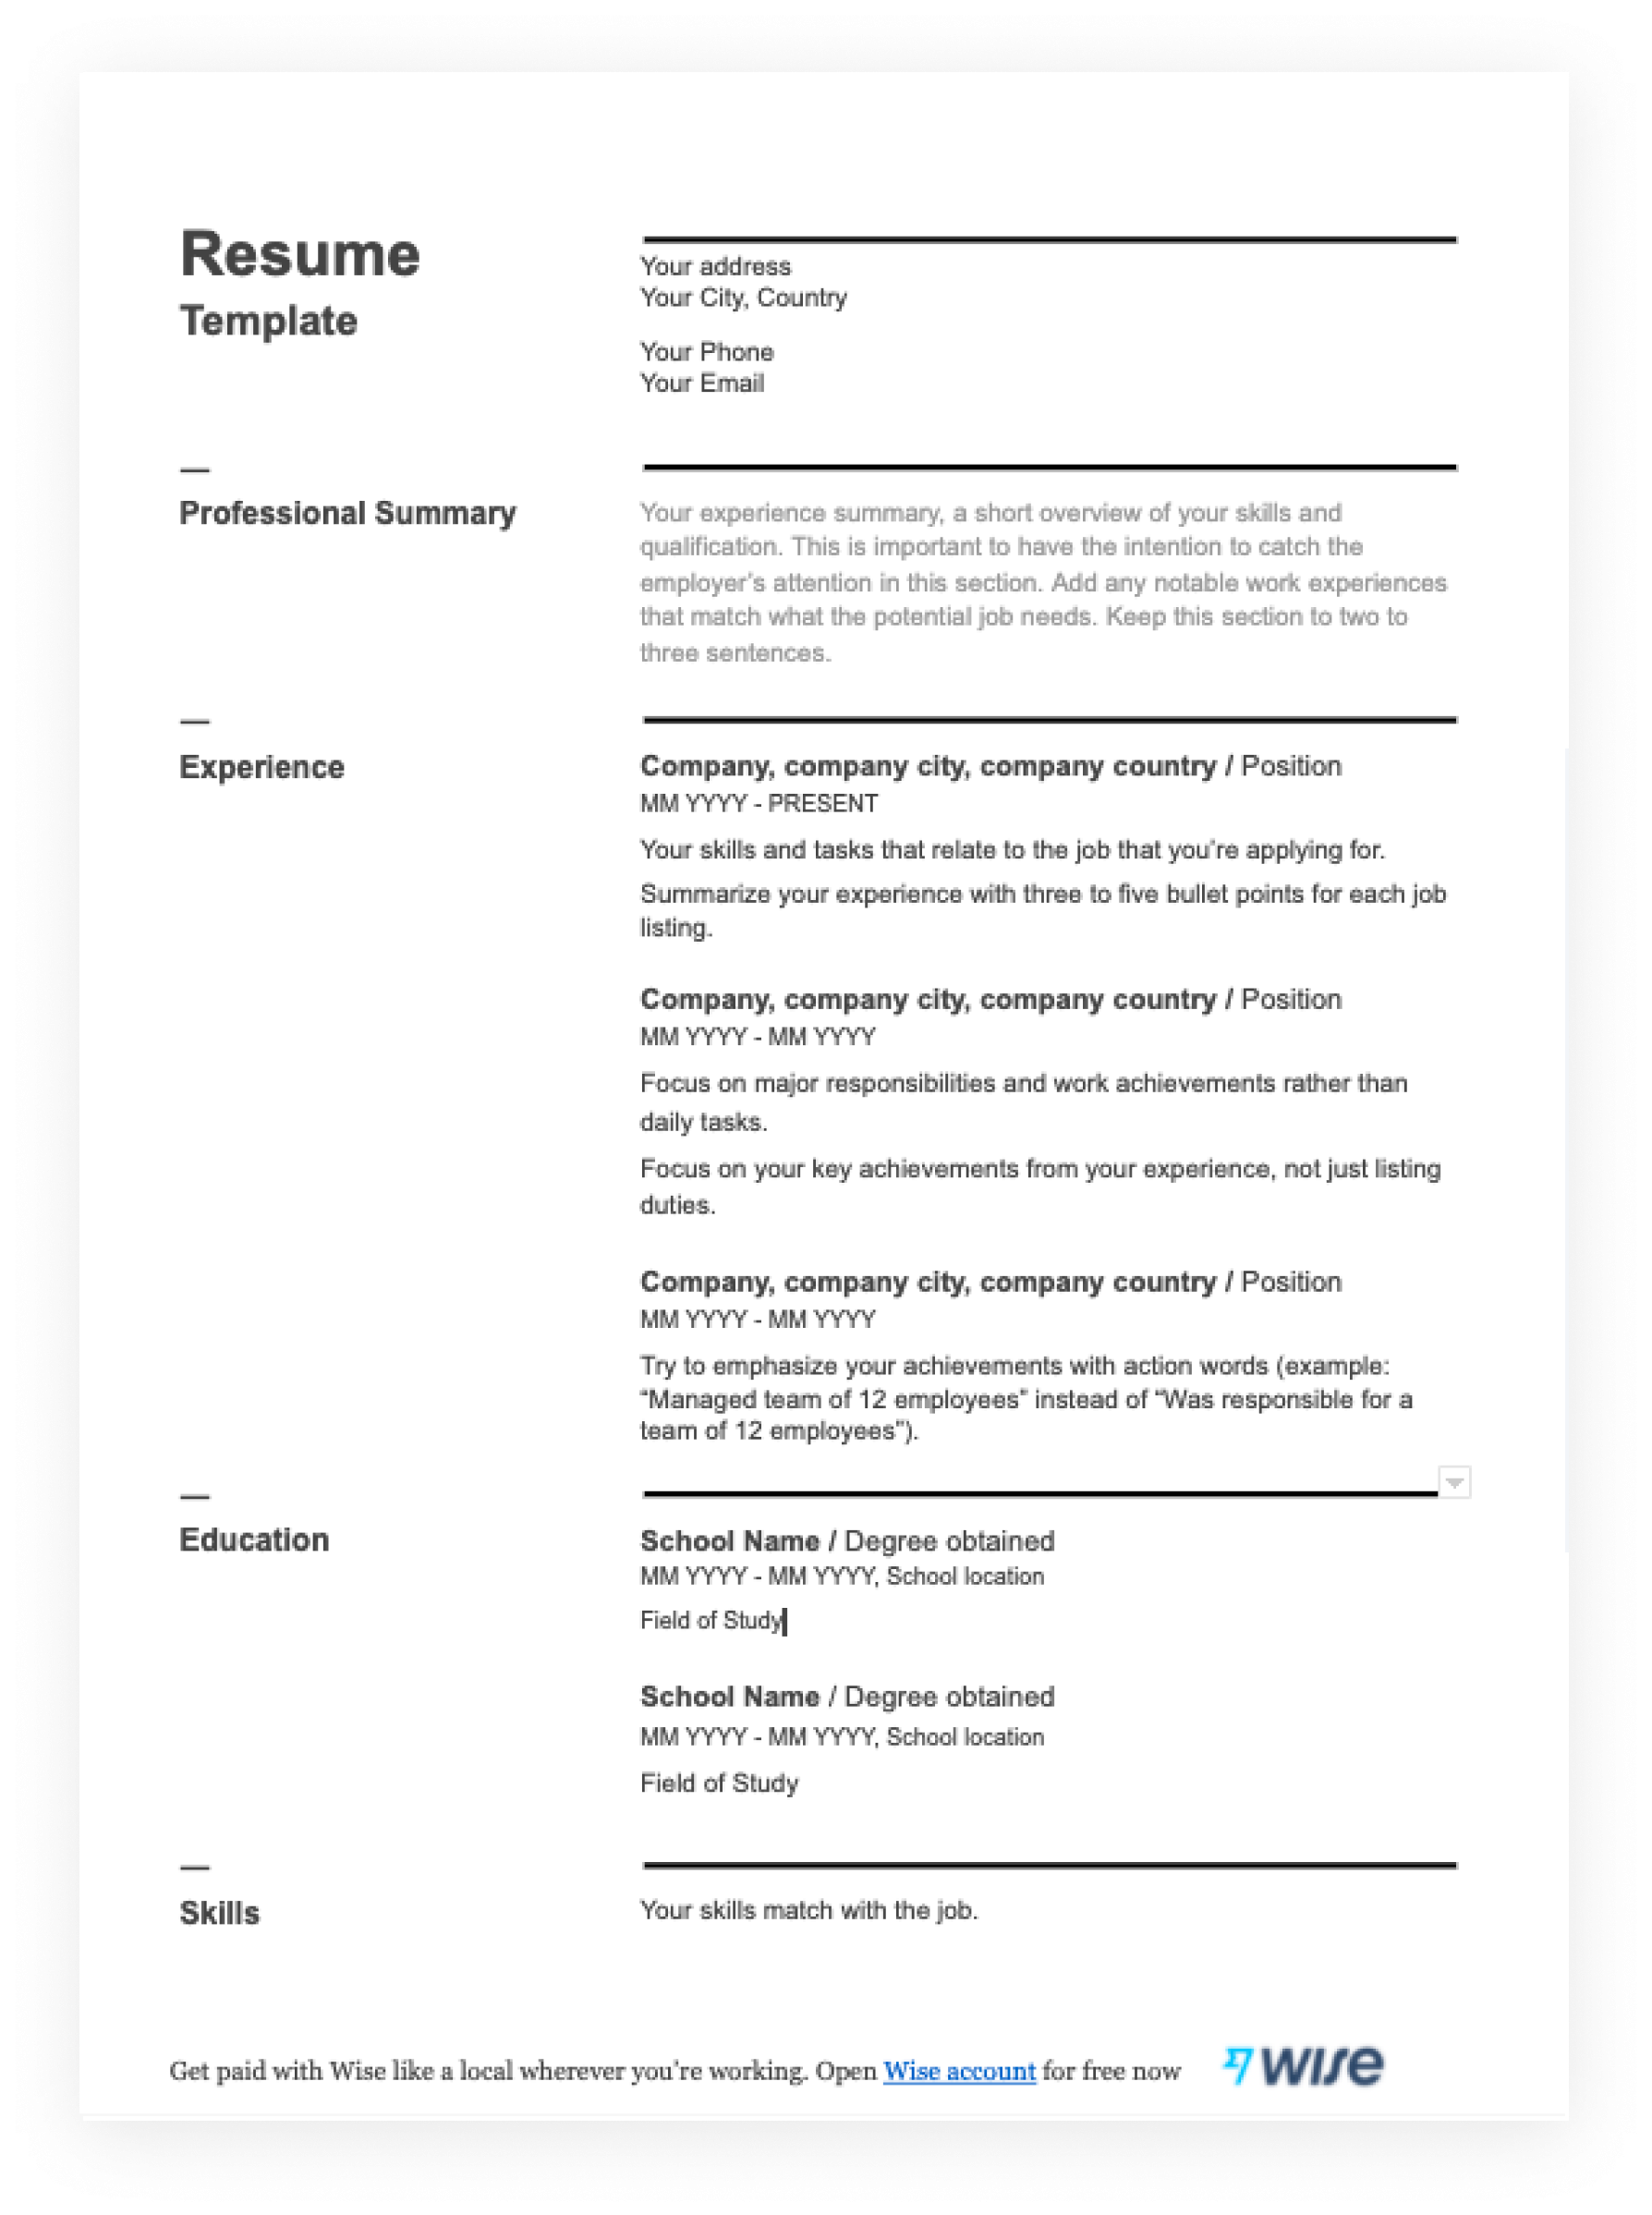 what is the best format resume template